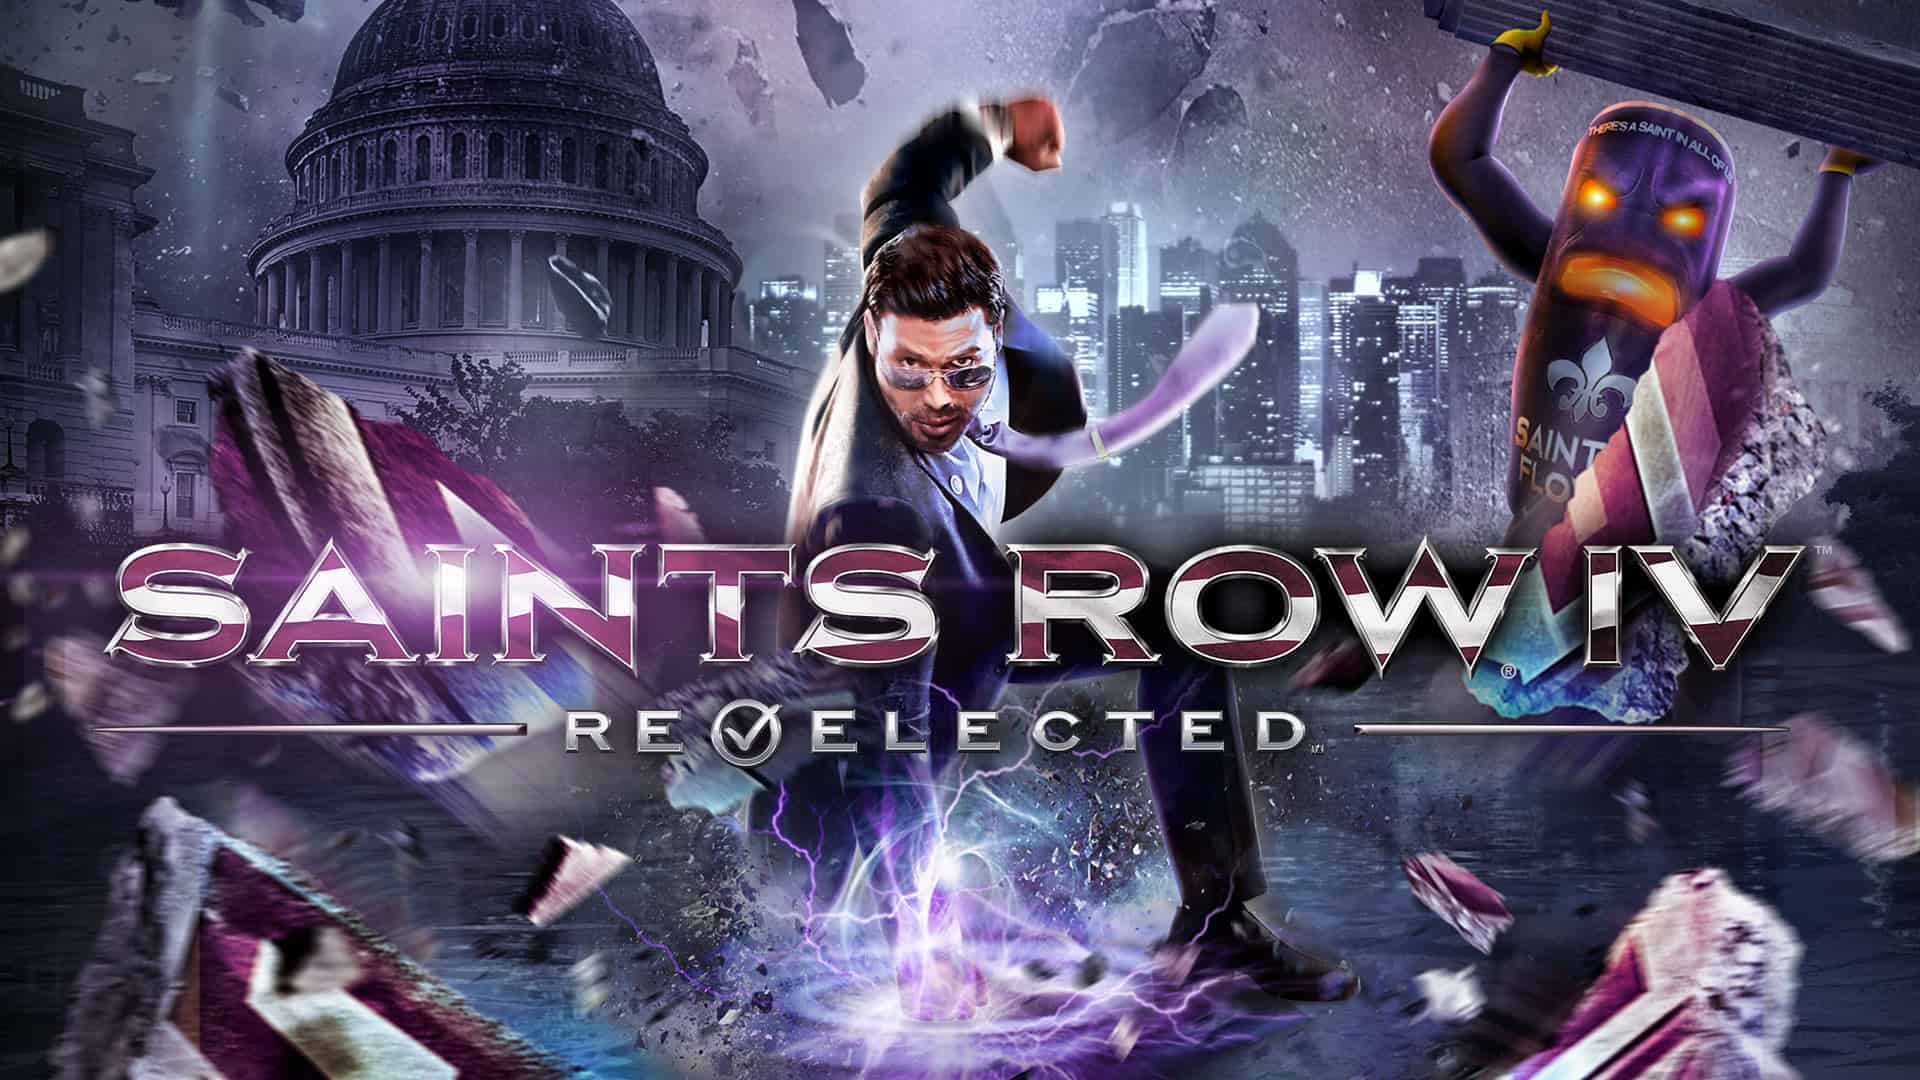 Prepare for a wild ride as you battle intergalactic invaders in Saints Row 4!